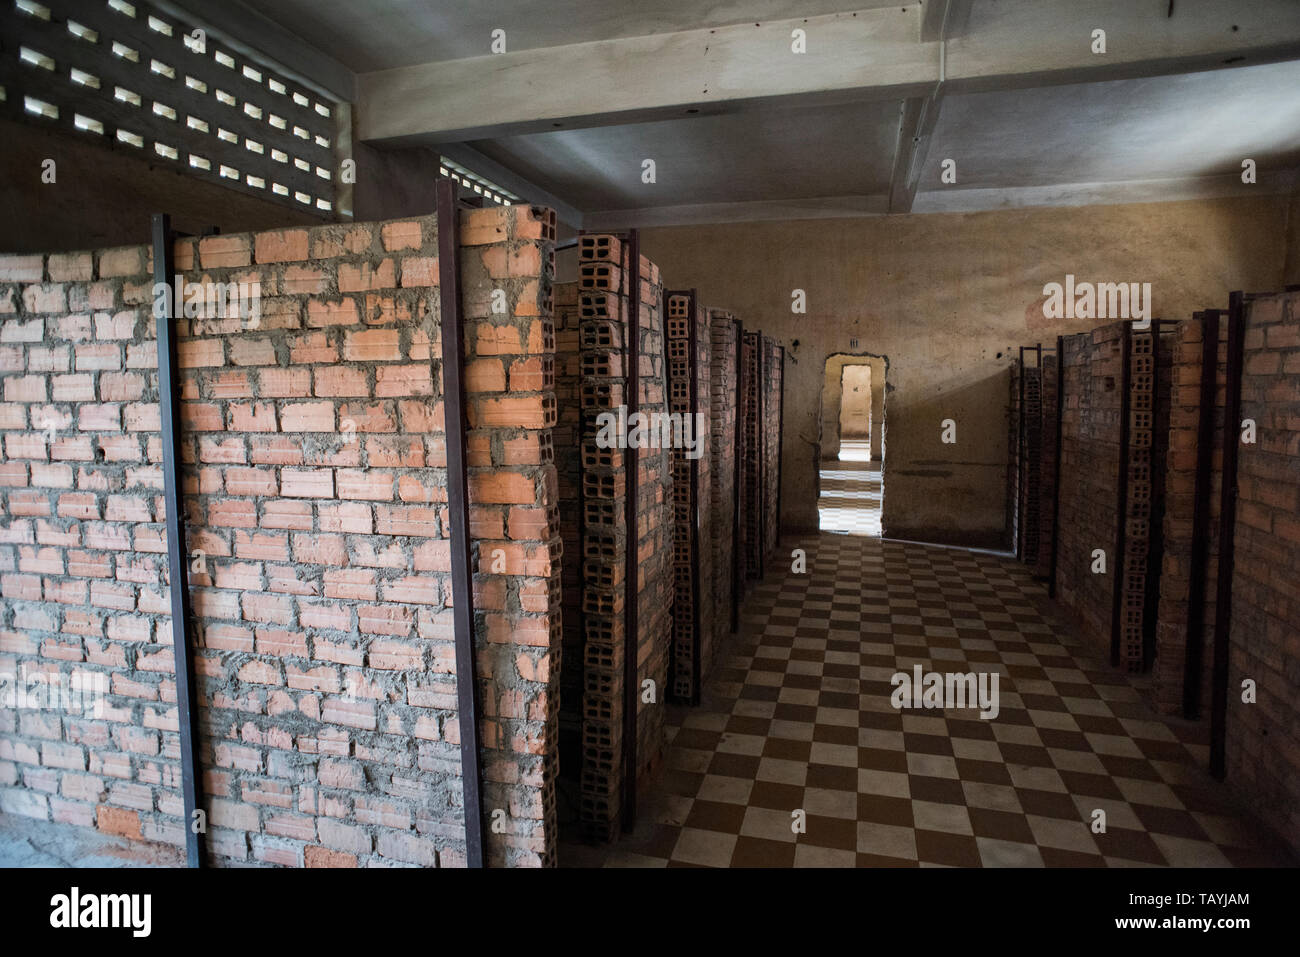 Concentration camp cells at the S-21 Tuol Sleng Genocide Museum, Phnom Penh, Cambodia. Stock Photo